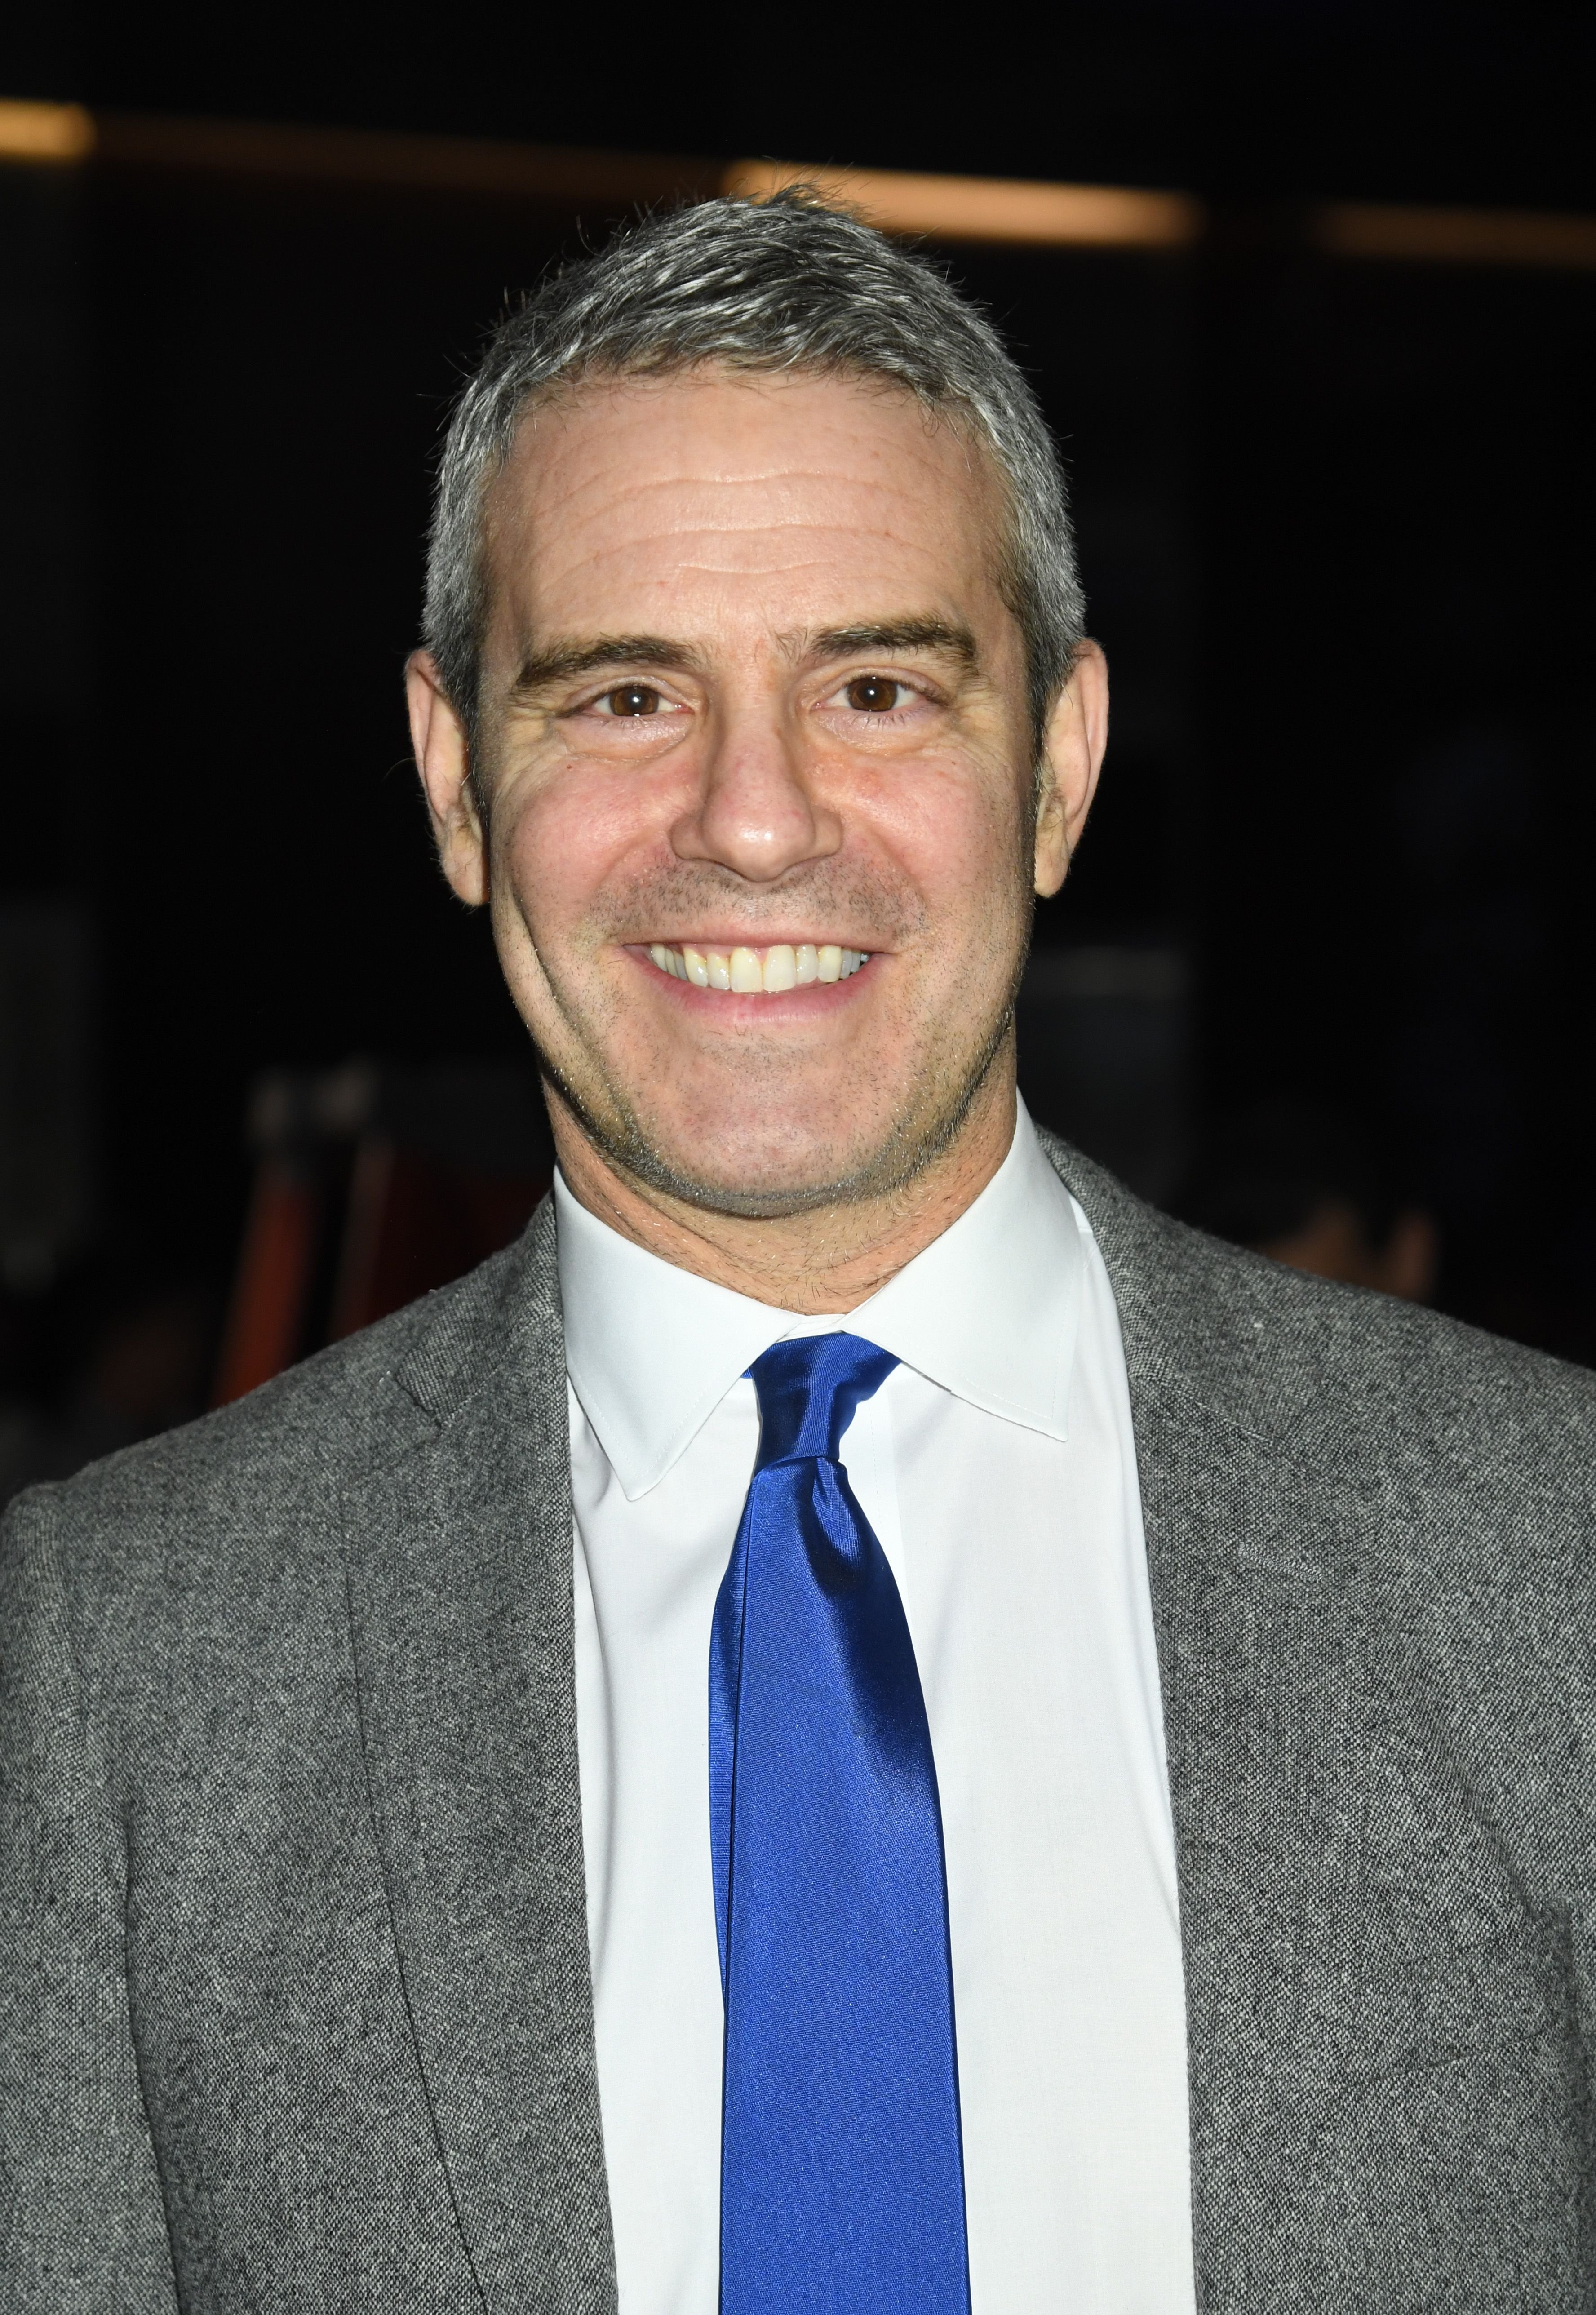 Andy Cohen at the Watches Of Switzerland Hudson Yards opening on March 14, 2019 at Hudson Yards in New York City | Photo: Getty Images